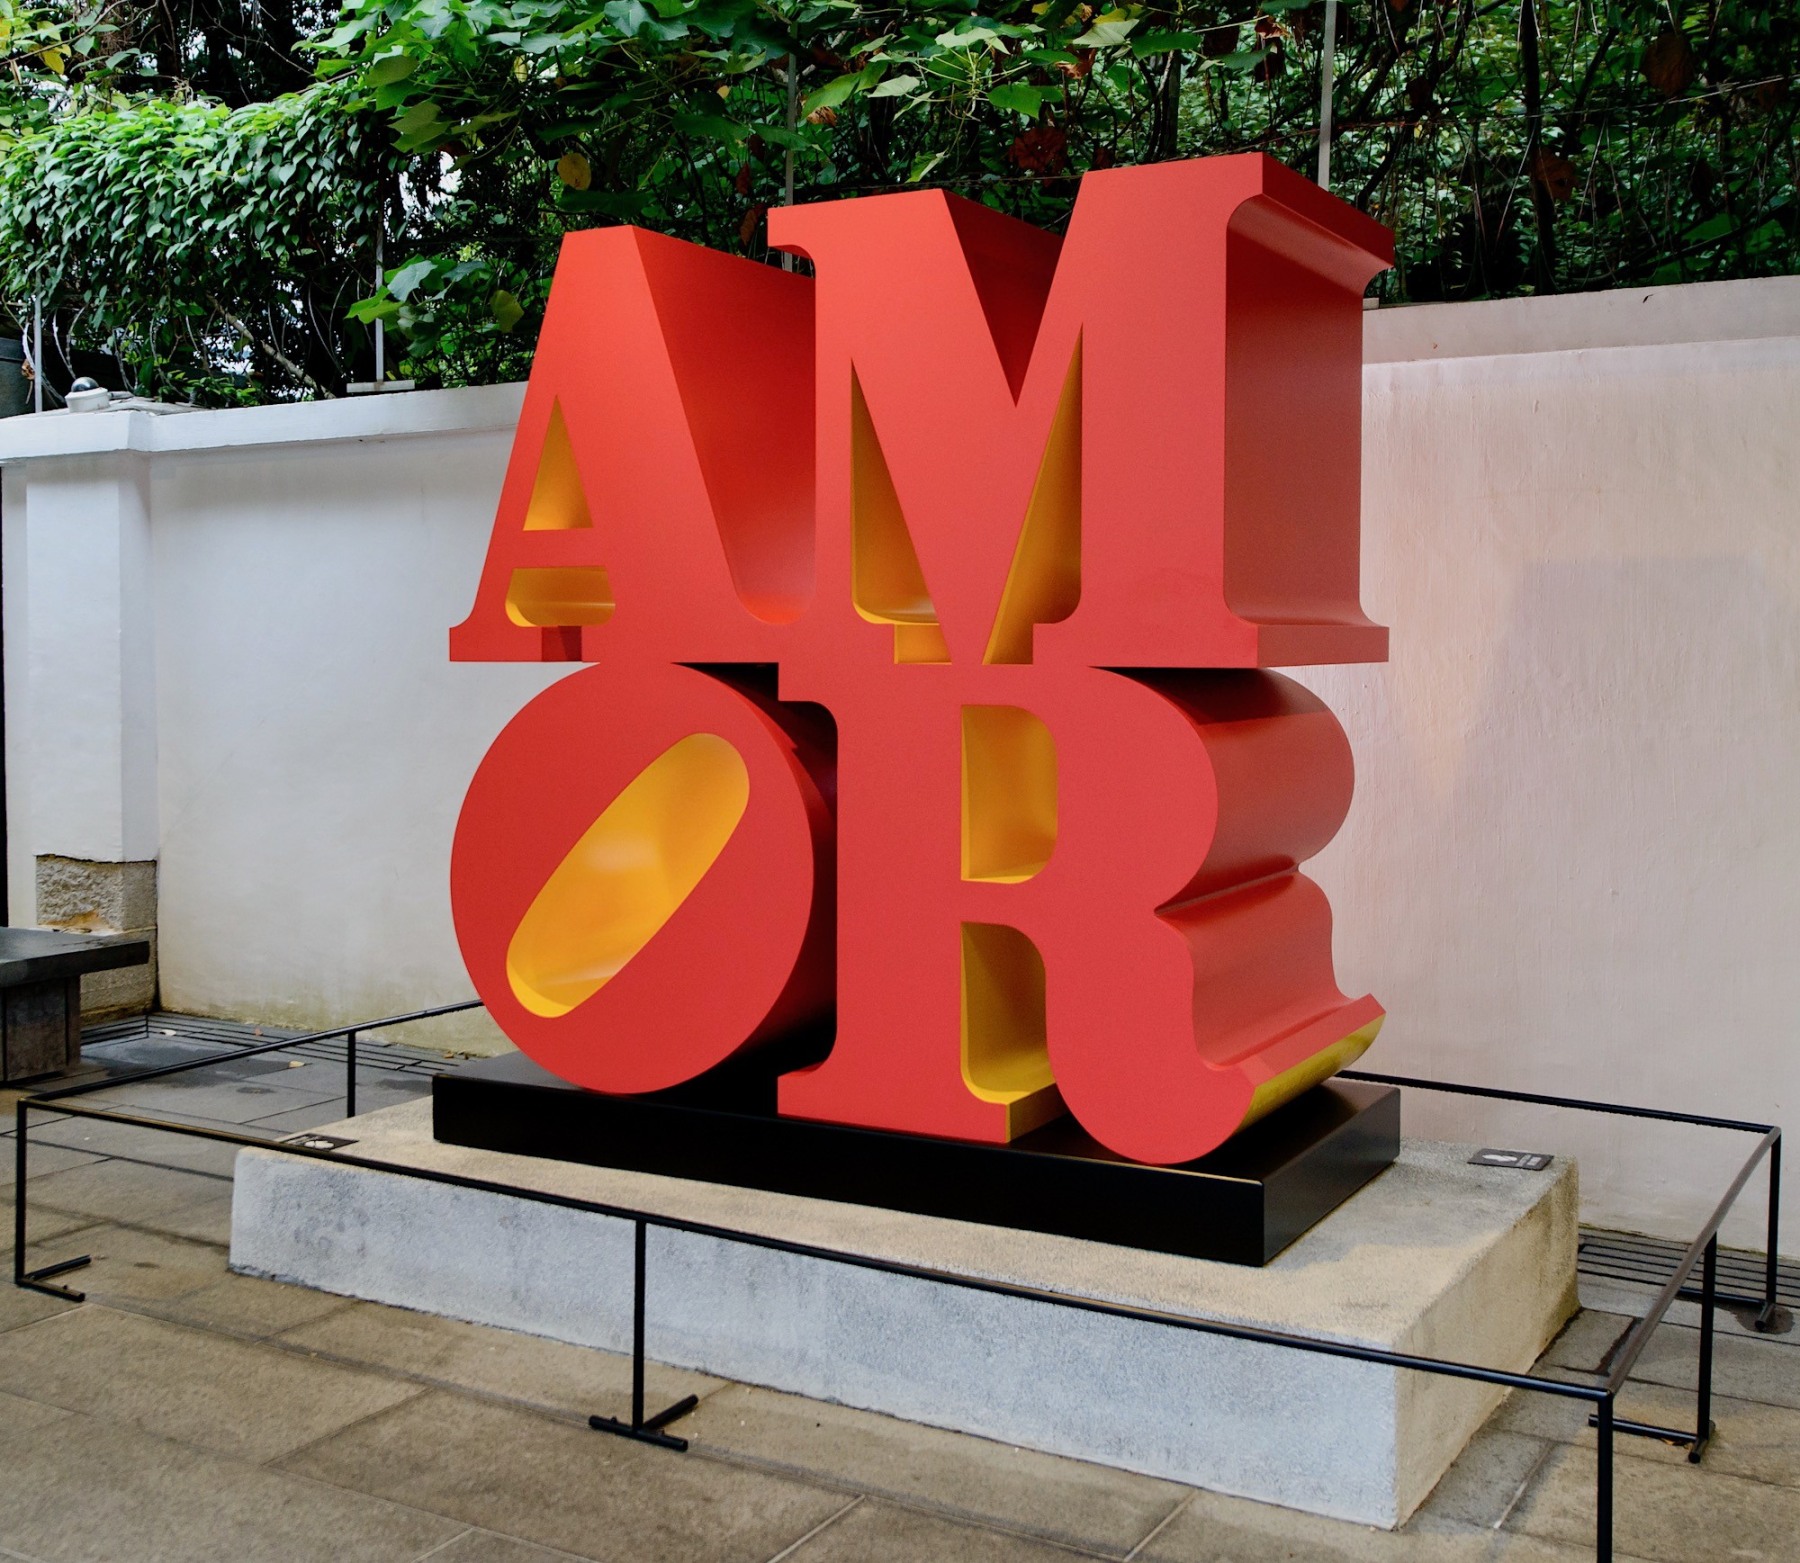 Installation view of the red and yellow polychrome aluminum sculpture AMOR, with the letters A and M stacked on top of a titled letter O and the letter R.